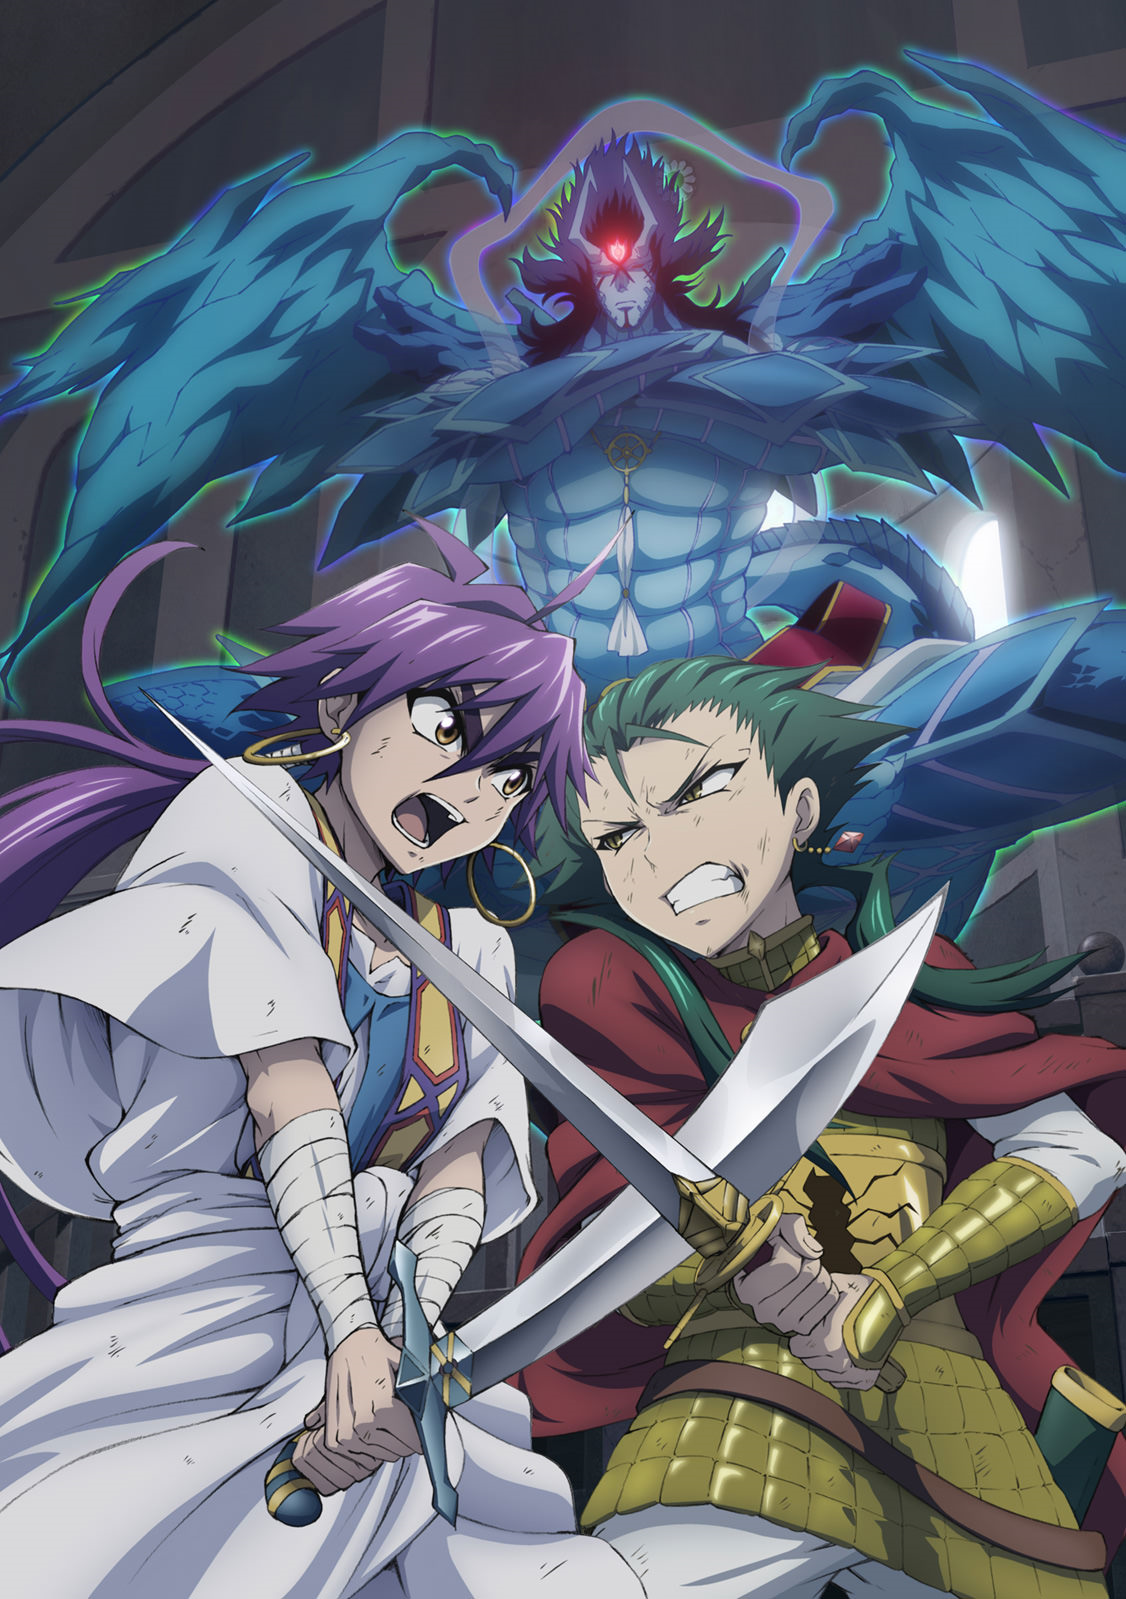 How to Watch Magi The Adventure of Sinbad anime? Easy Watch Order Guide